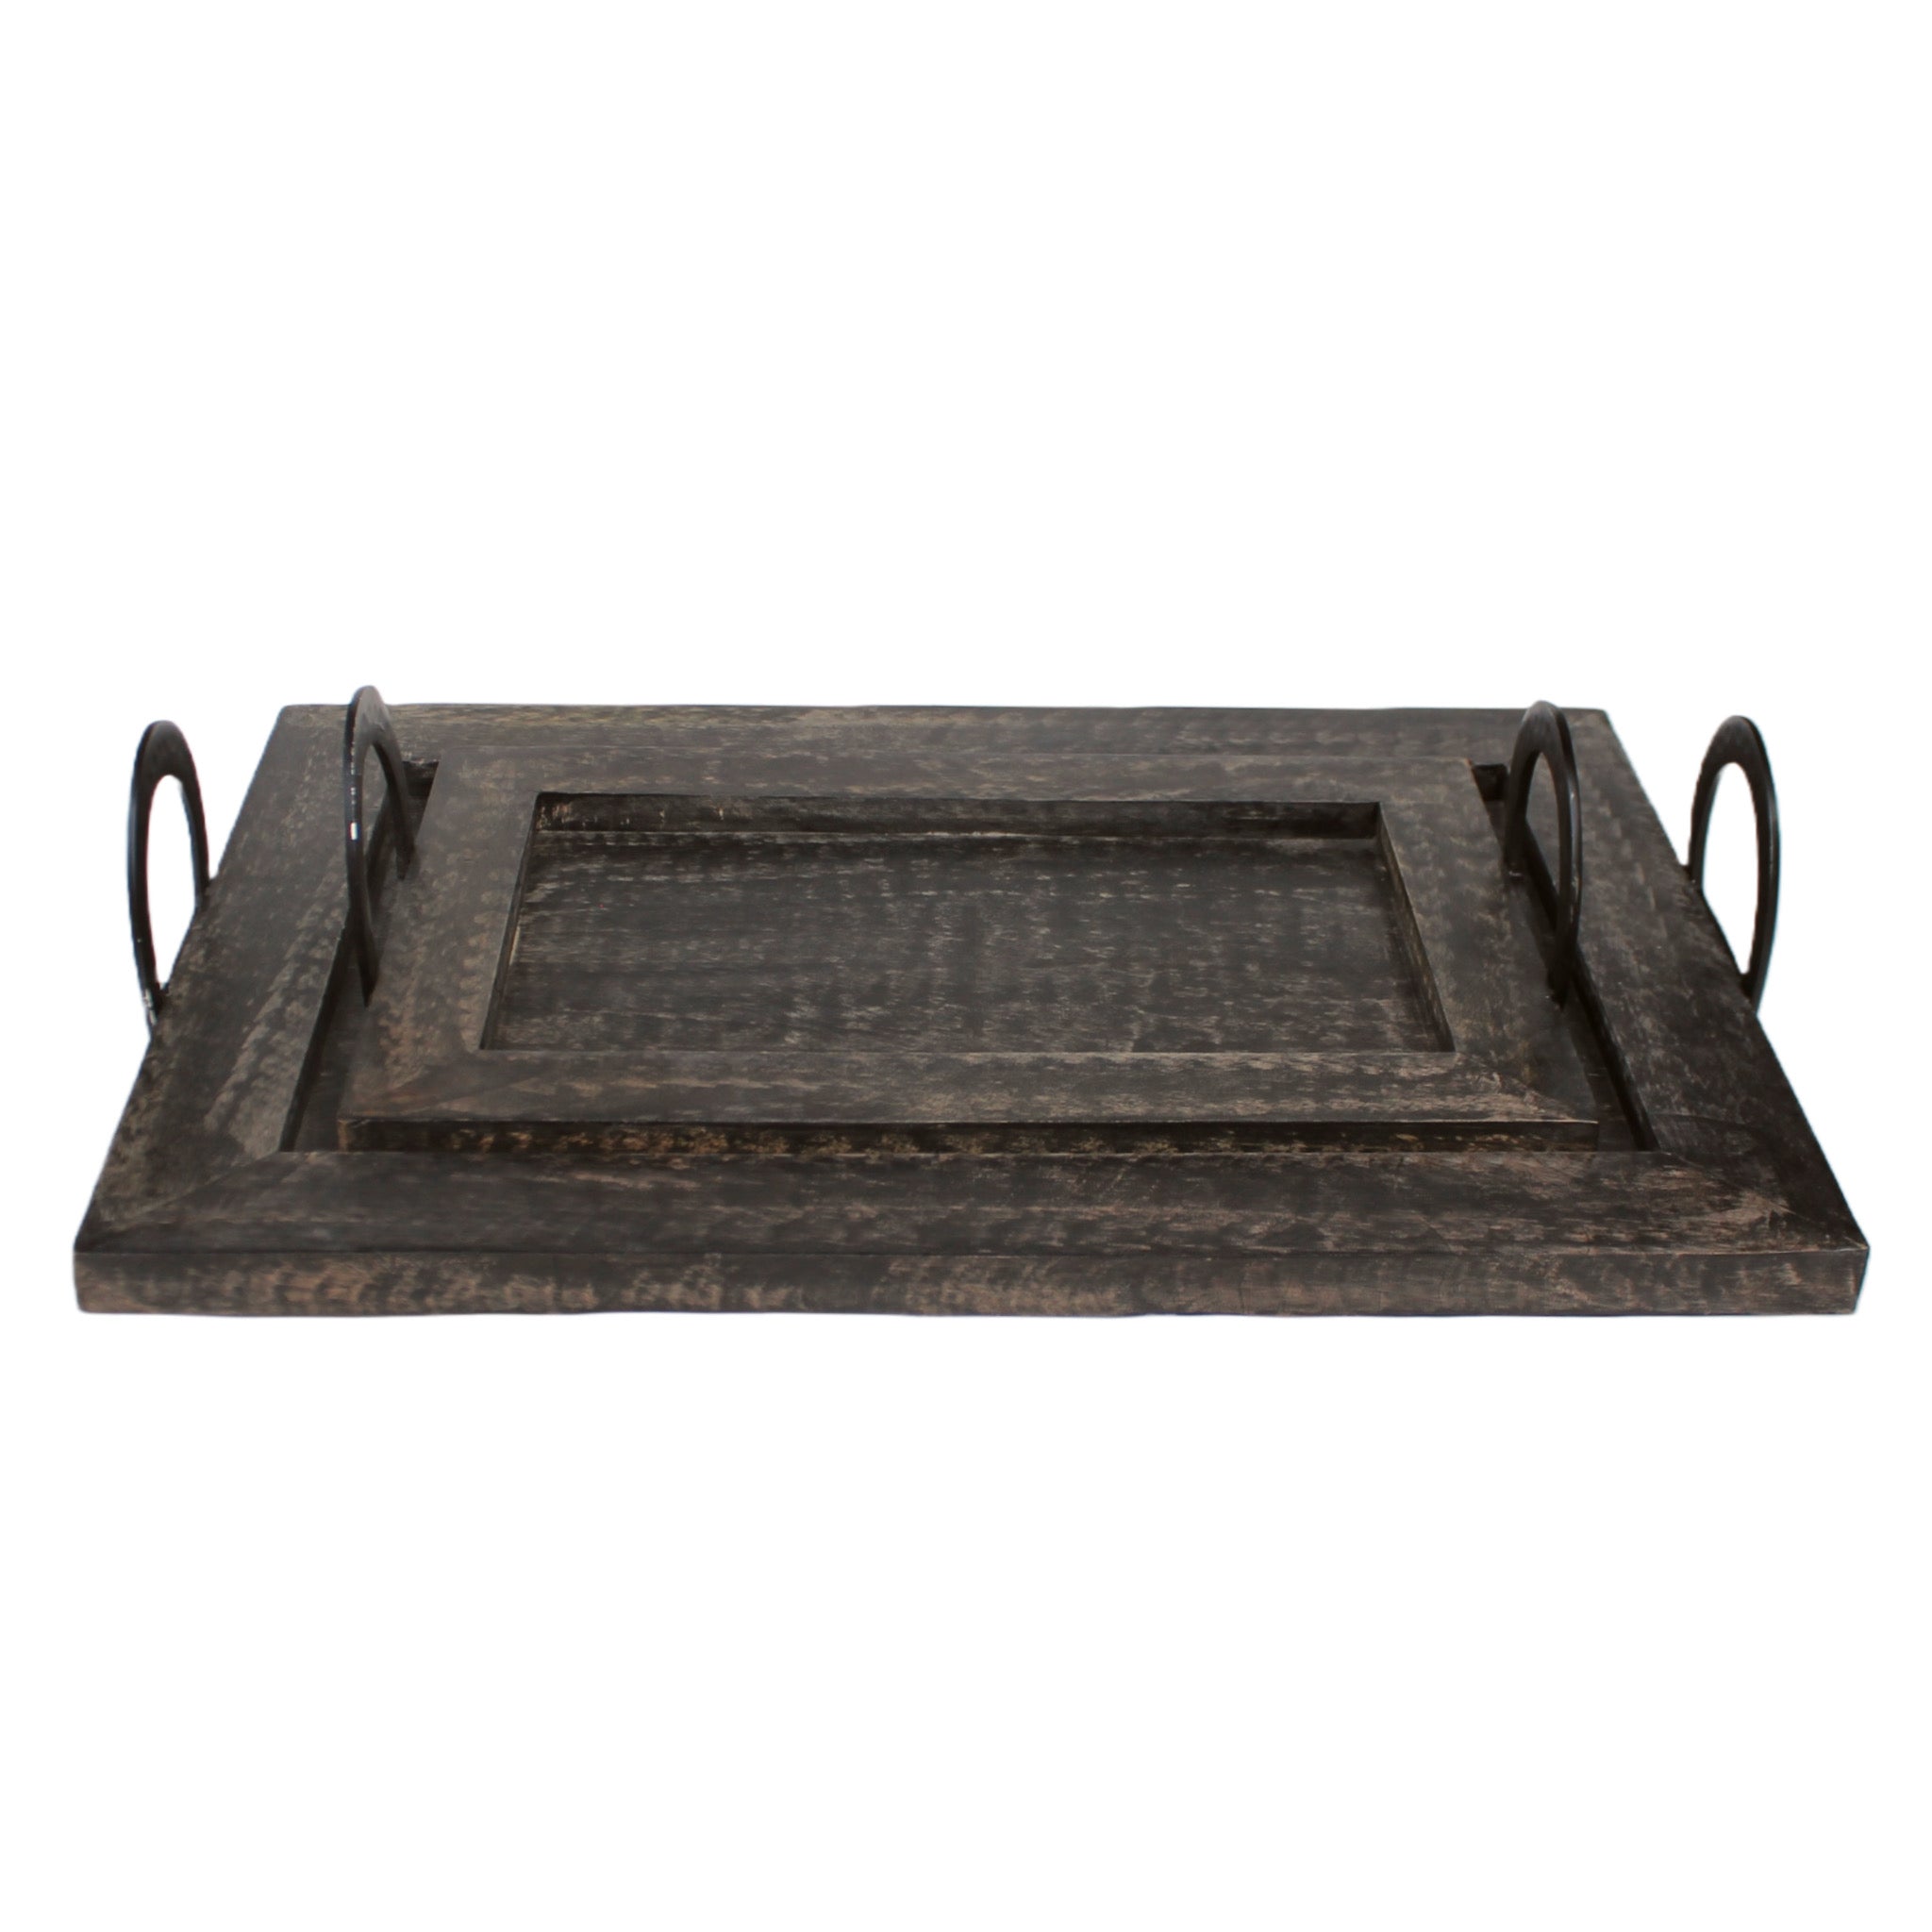 Shaker Serving Trays in Charcoal Grey, Set of 2